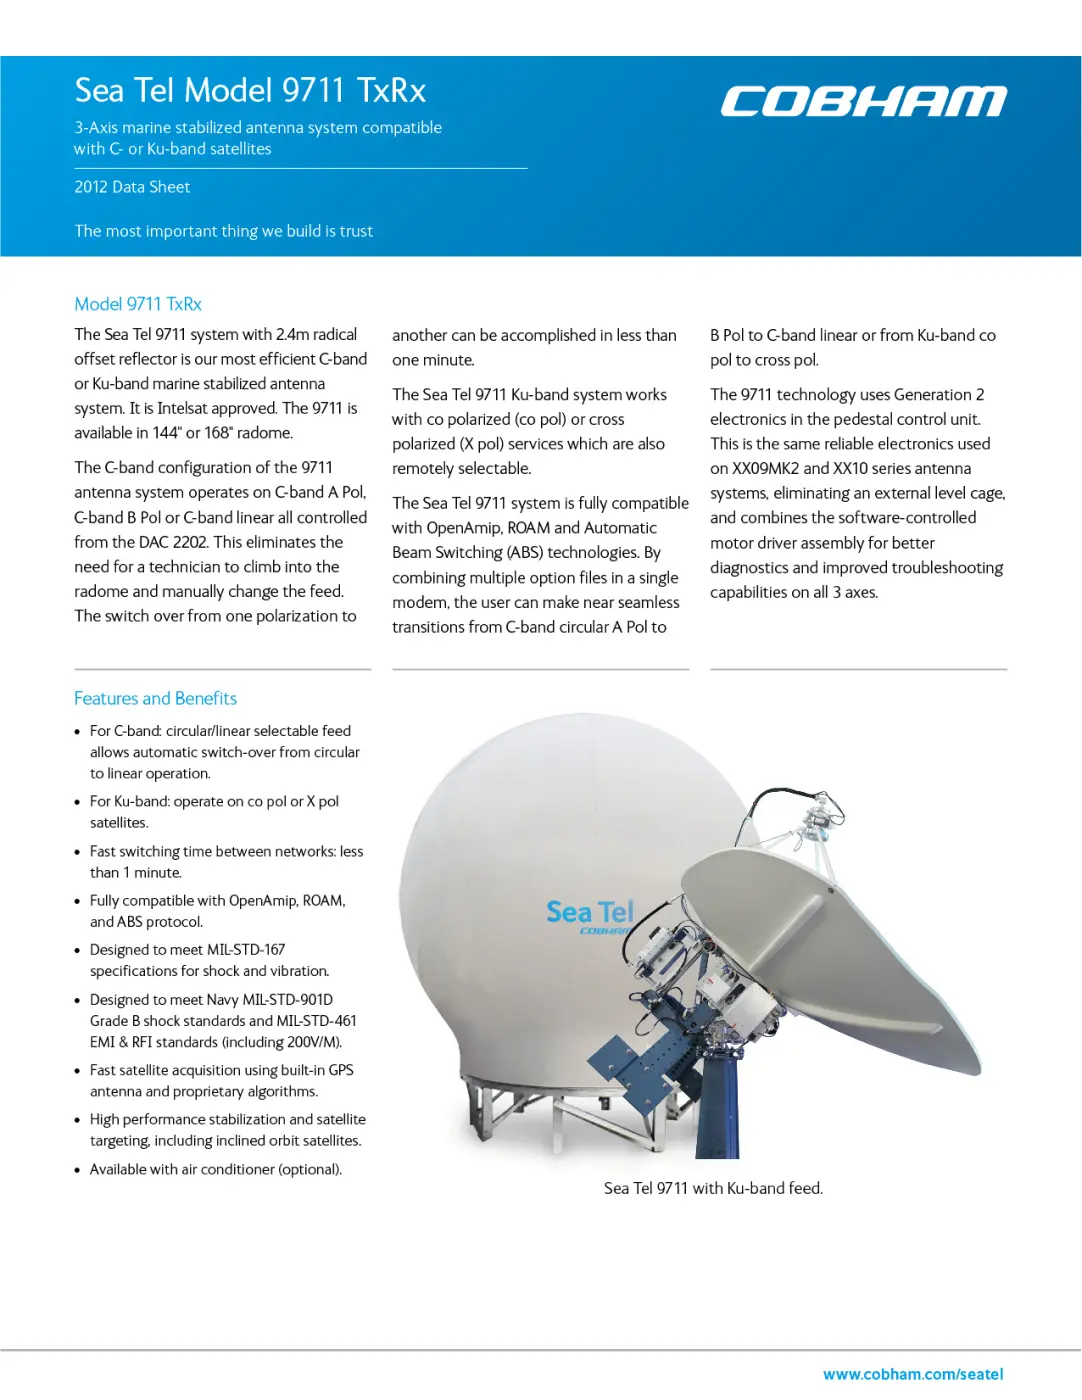 Data sheet for Cobham 9711 TxRx, 3-Axis marine stabilized antenna system compatible with C- or Ku-band satellites